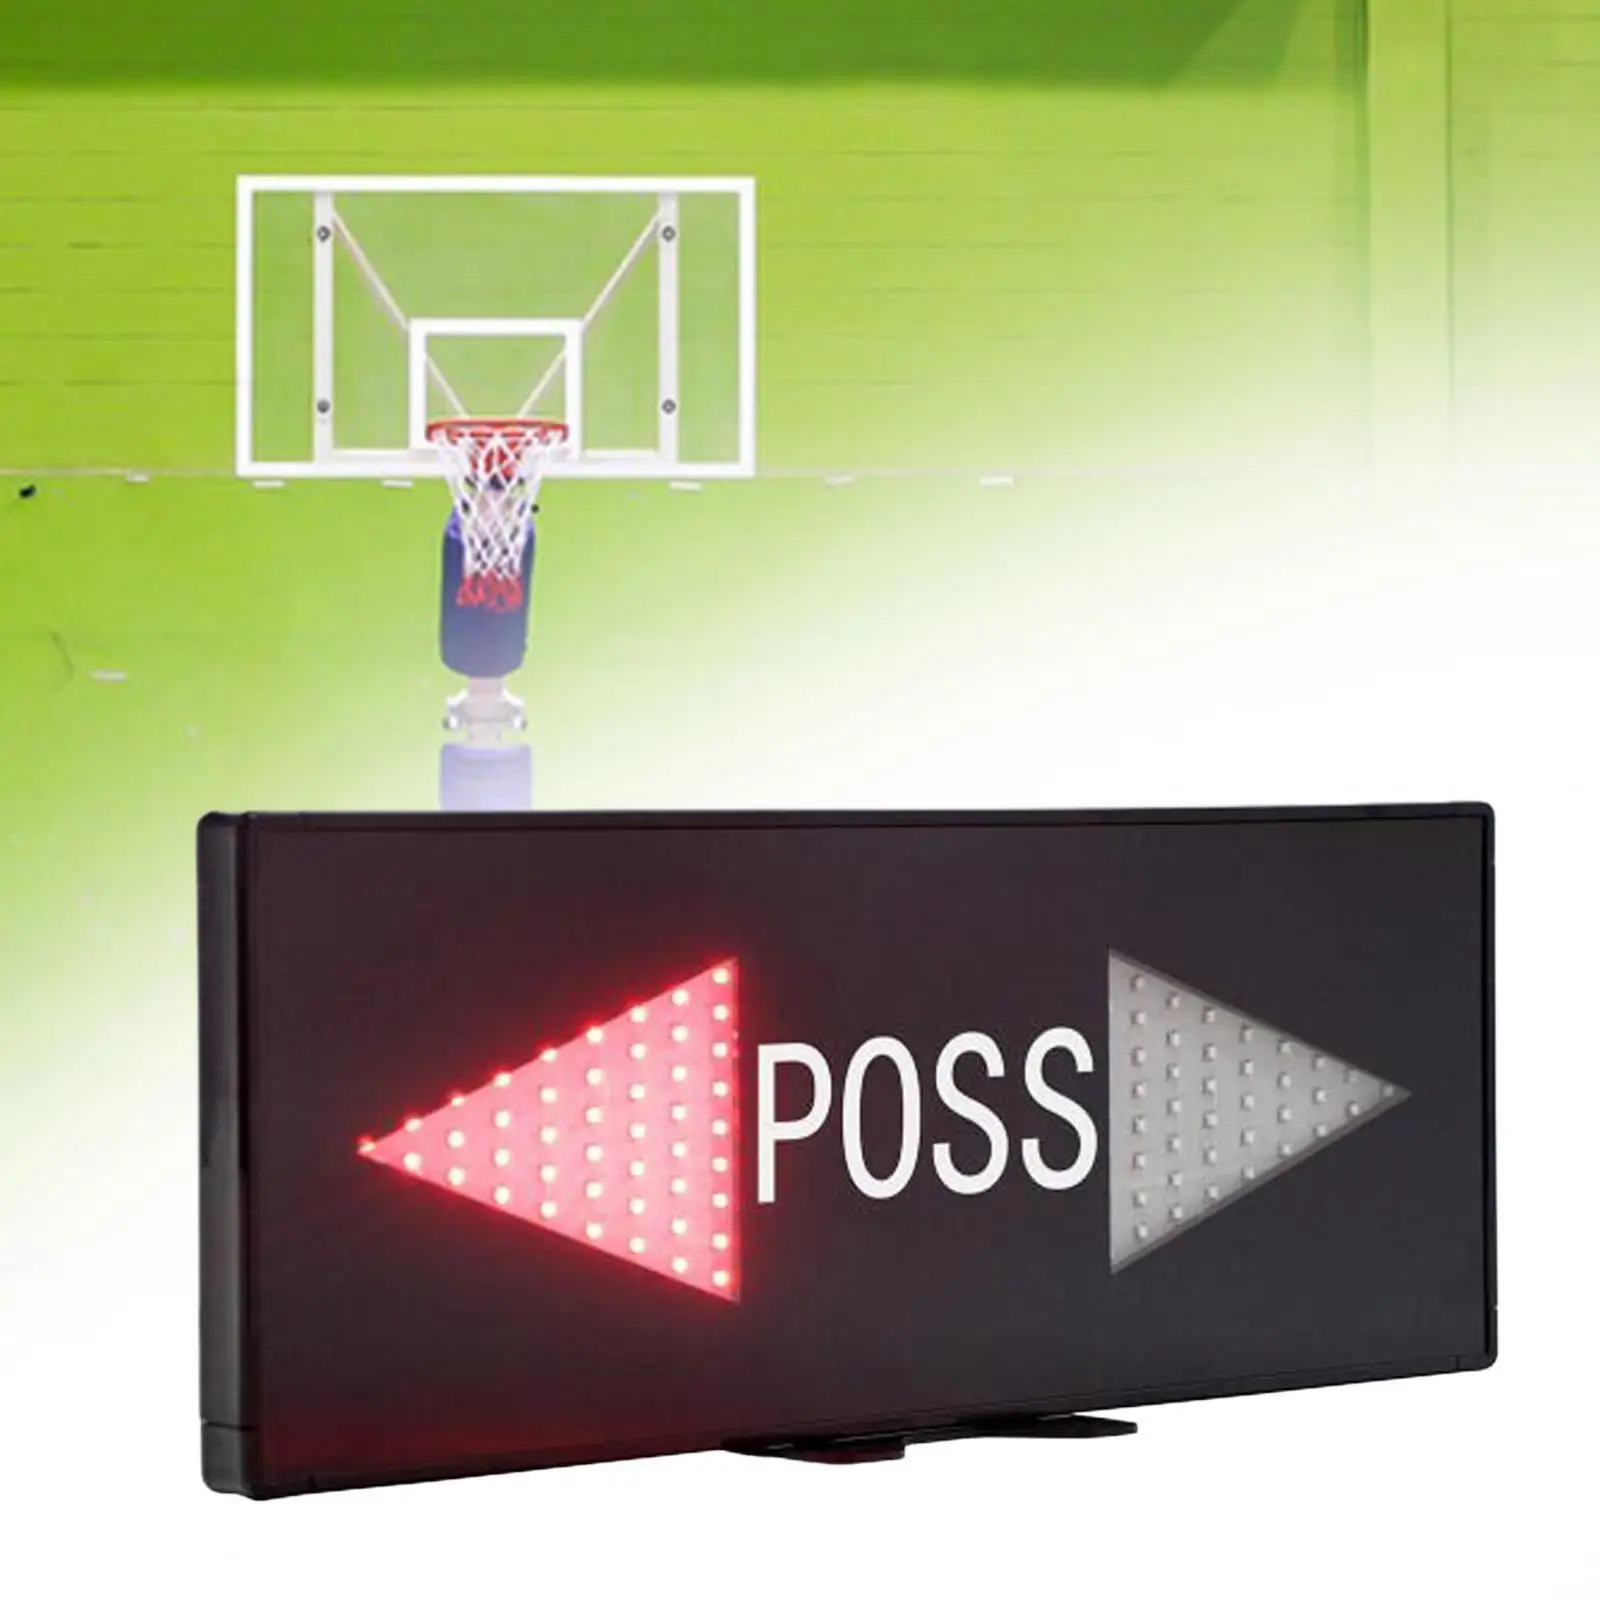 Basketball Possession Indicator Professional Referees for Basketball League